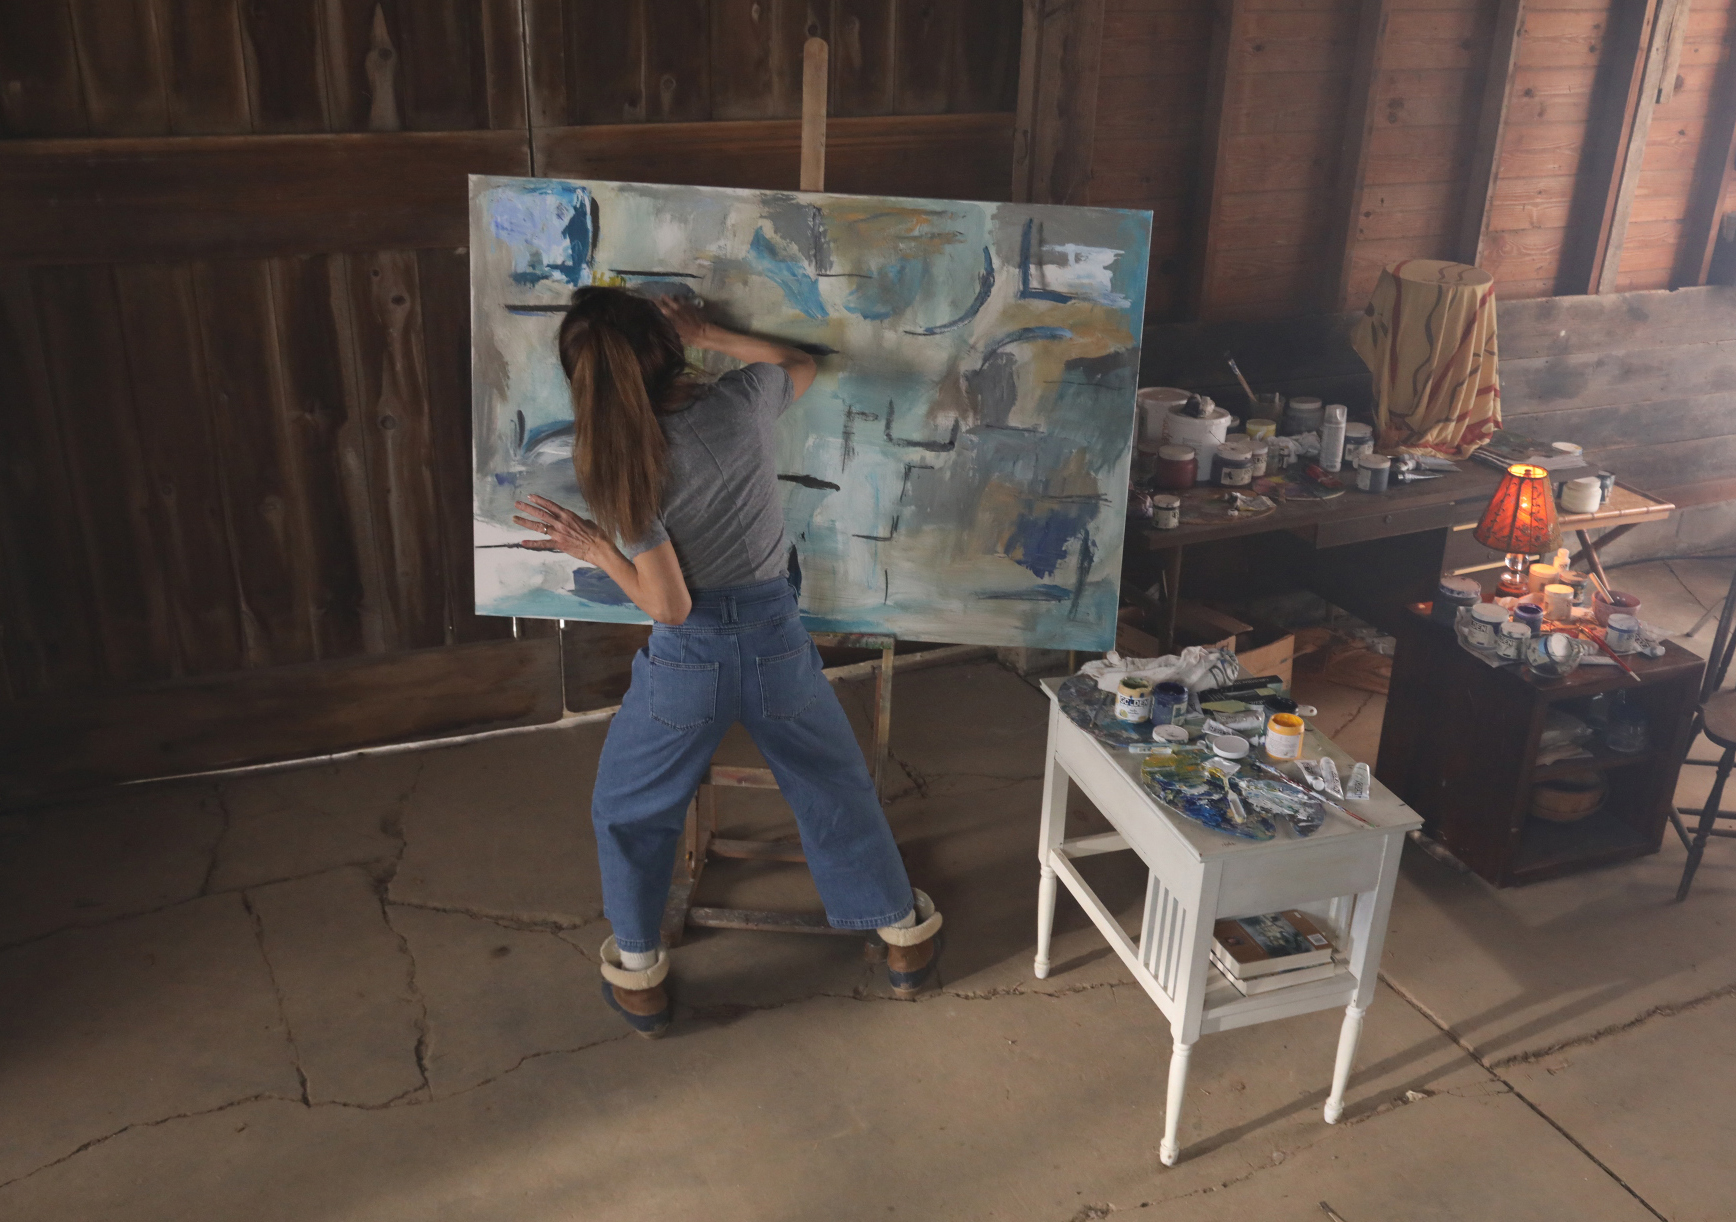 Claire (Lena Olin) painting in her barn studio in THE ARTIST’S WIFE. Photo by Michael Lavine.